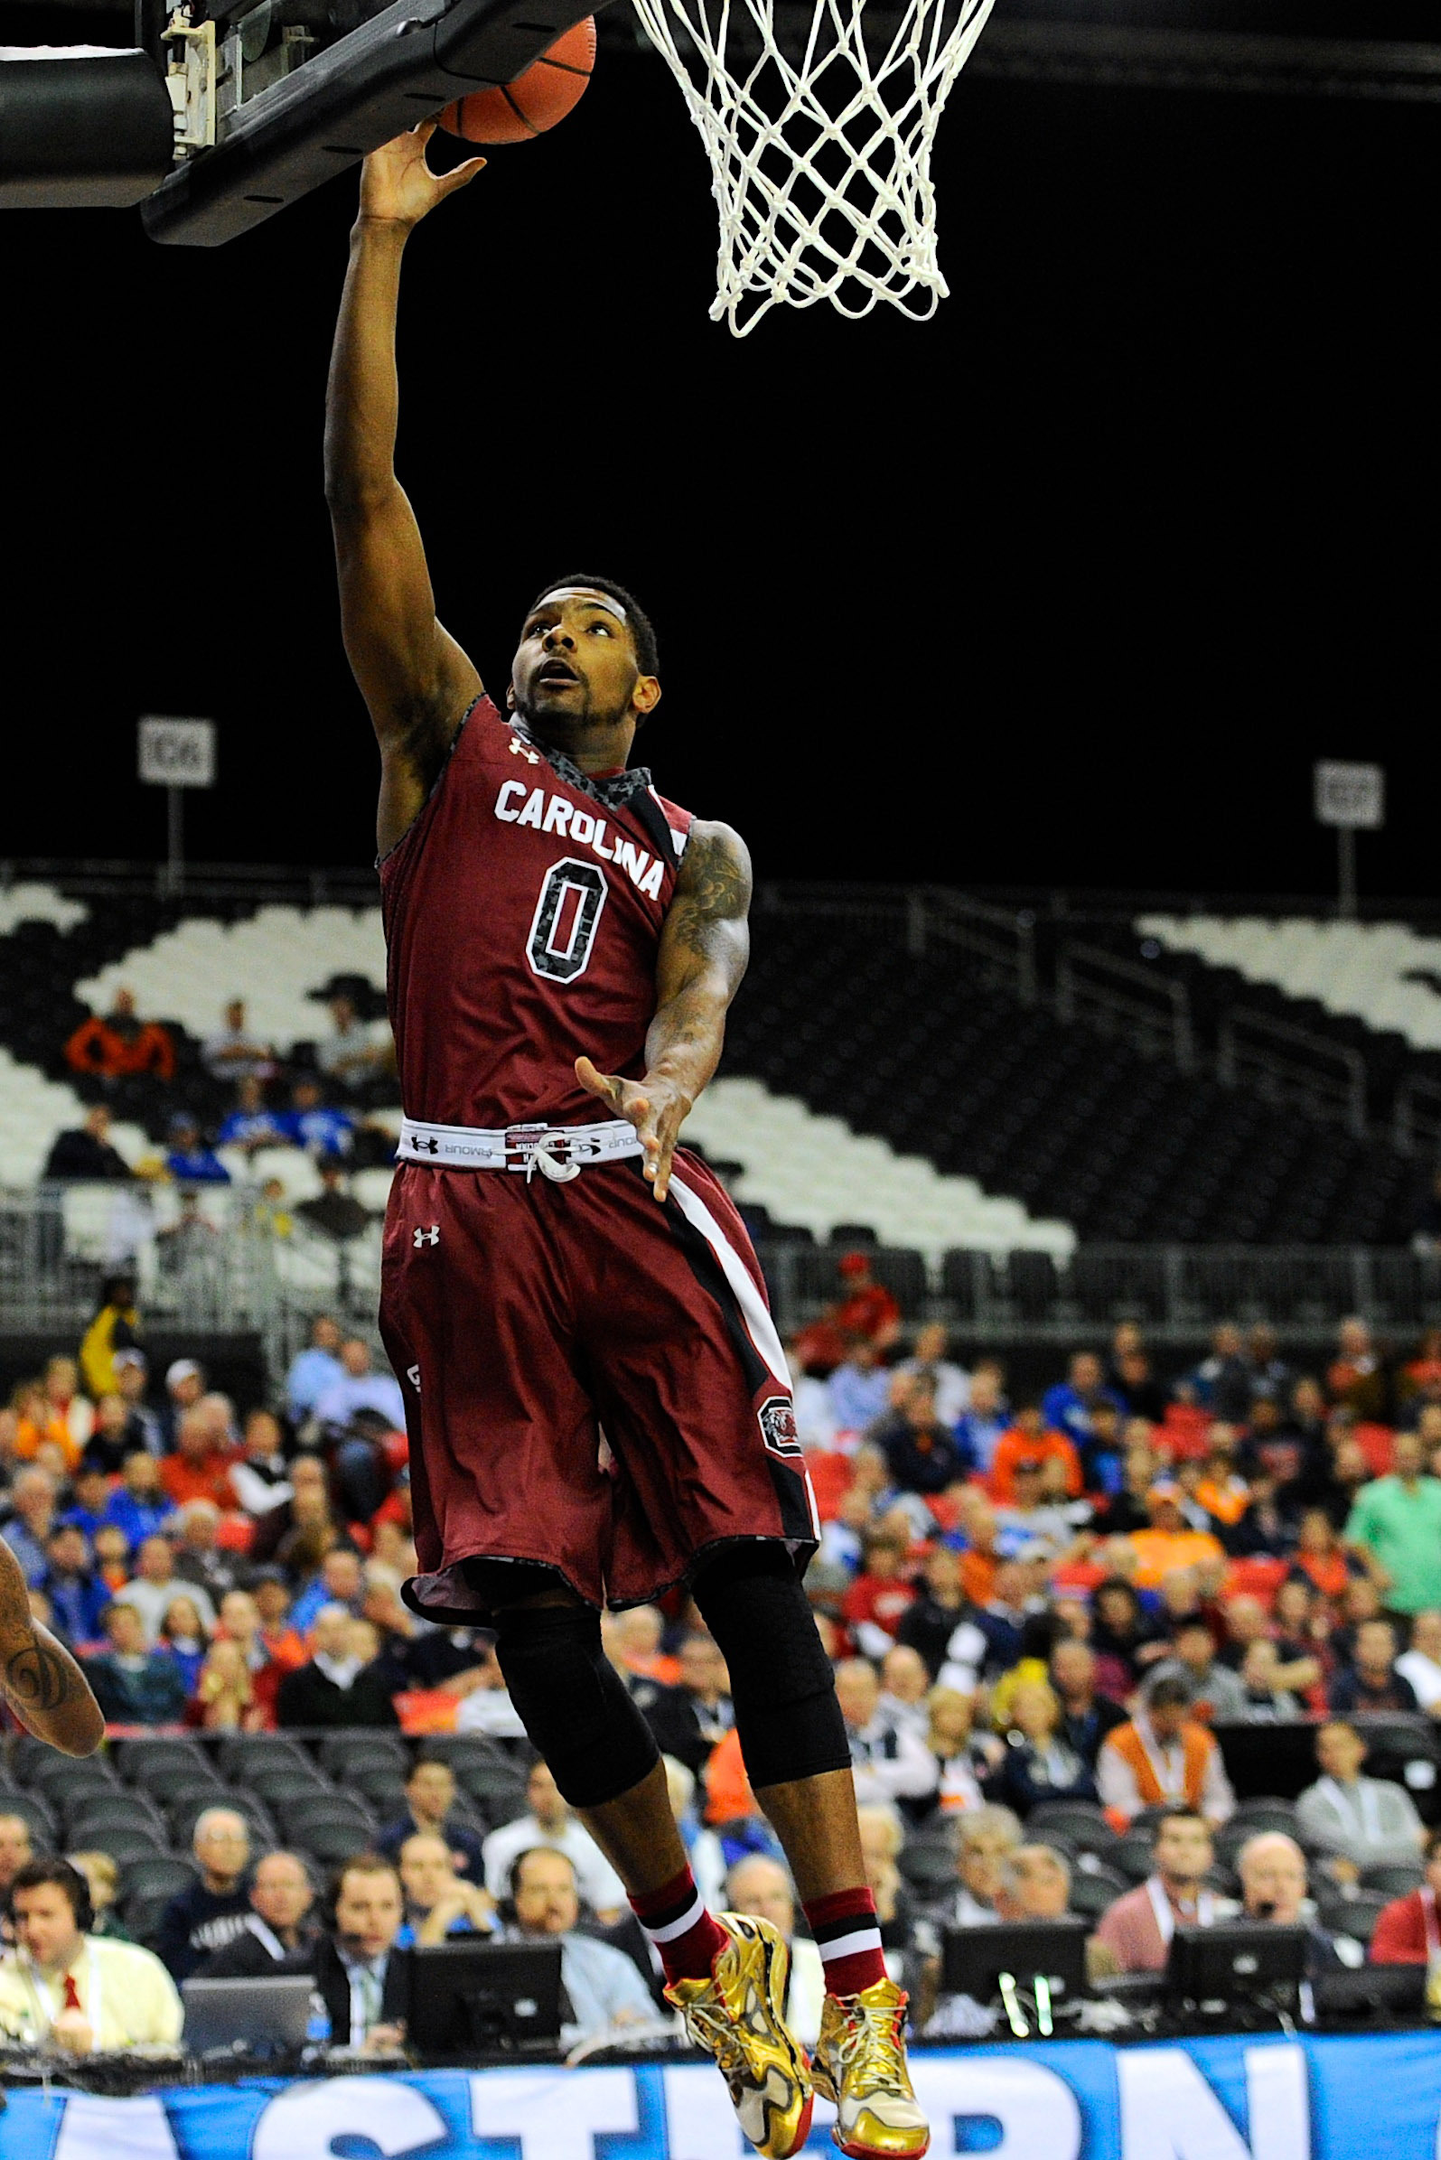 Thornwell Named As Finalist For 2014 Kyle Macy Award